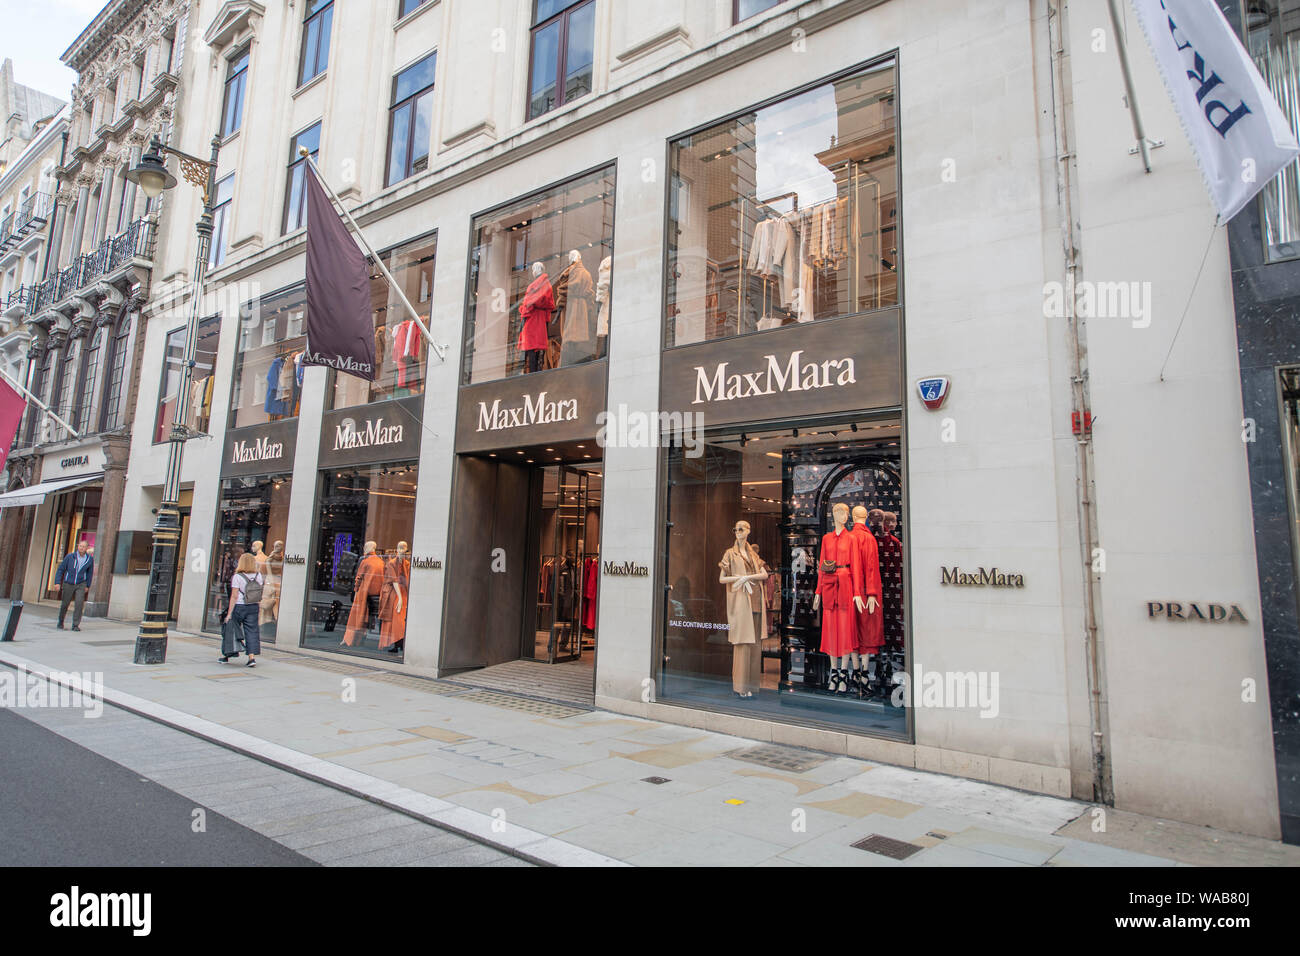 Bond Street 19th August 2019. Max Mara store frontage in Old Bond Street  Stock Photo - Alamy